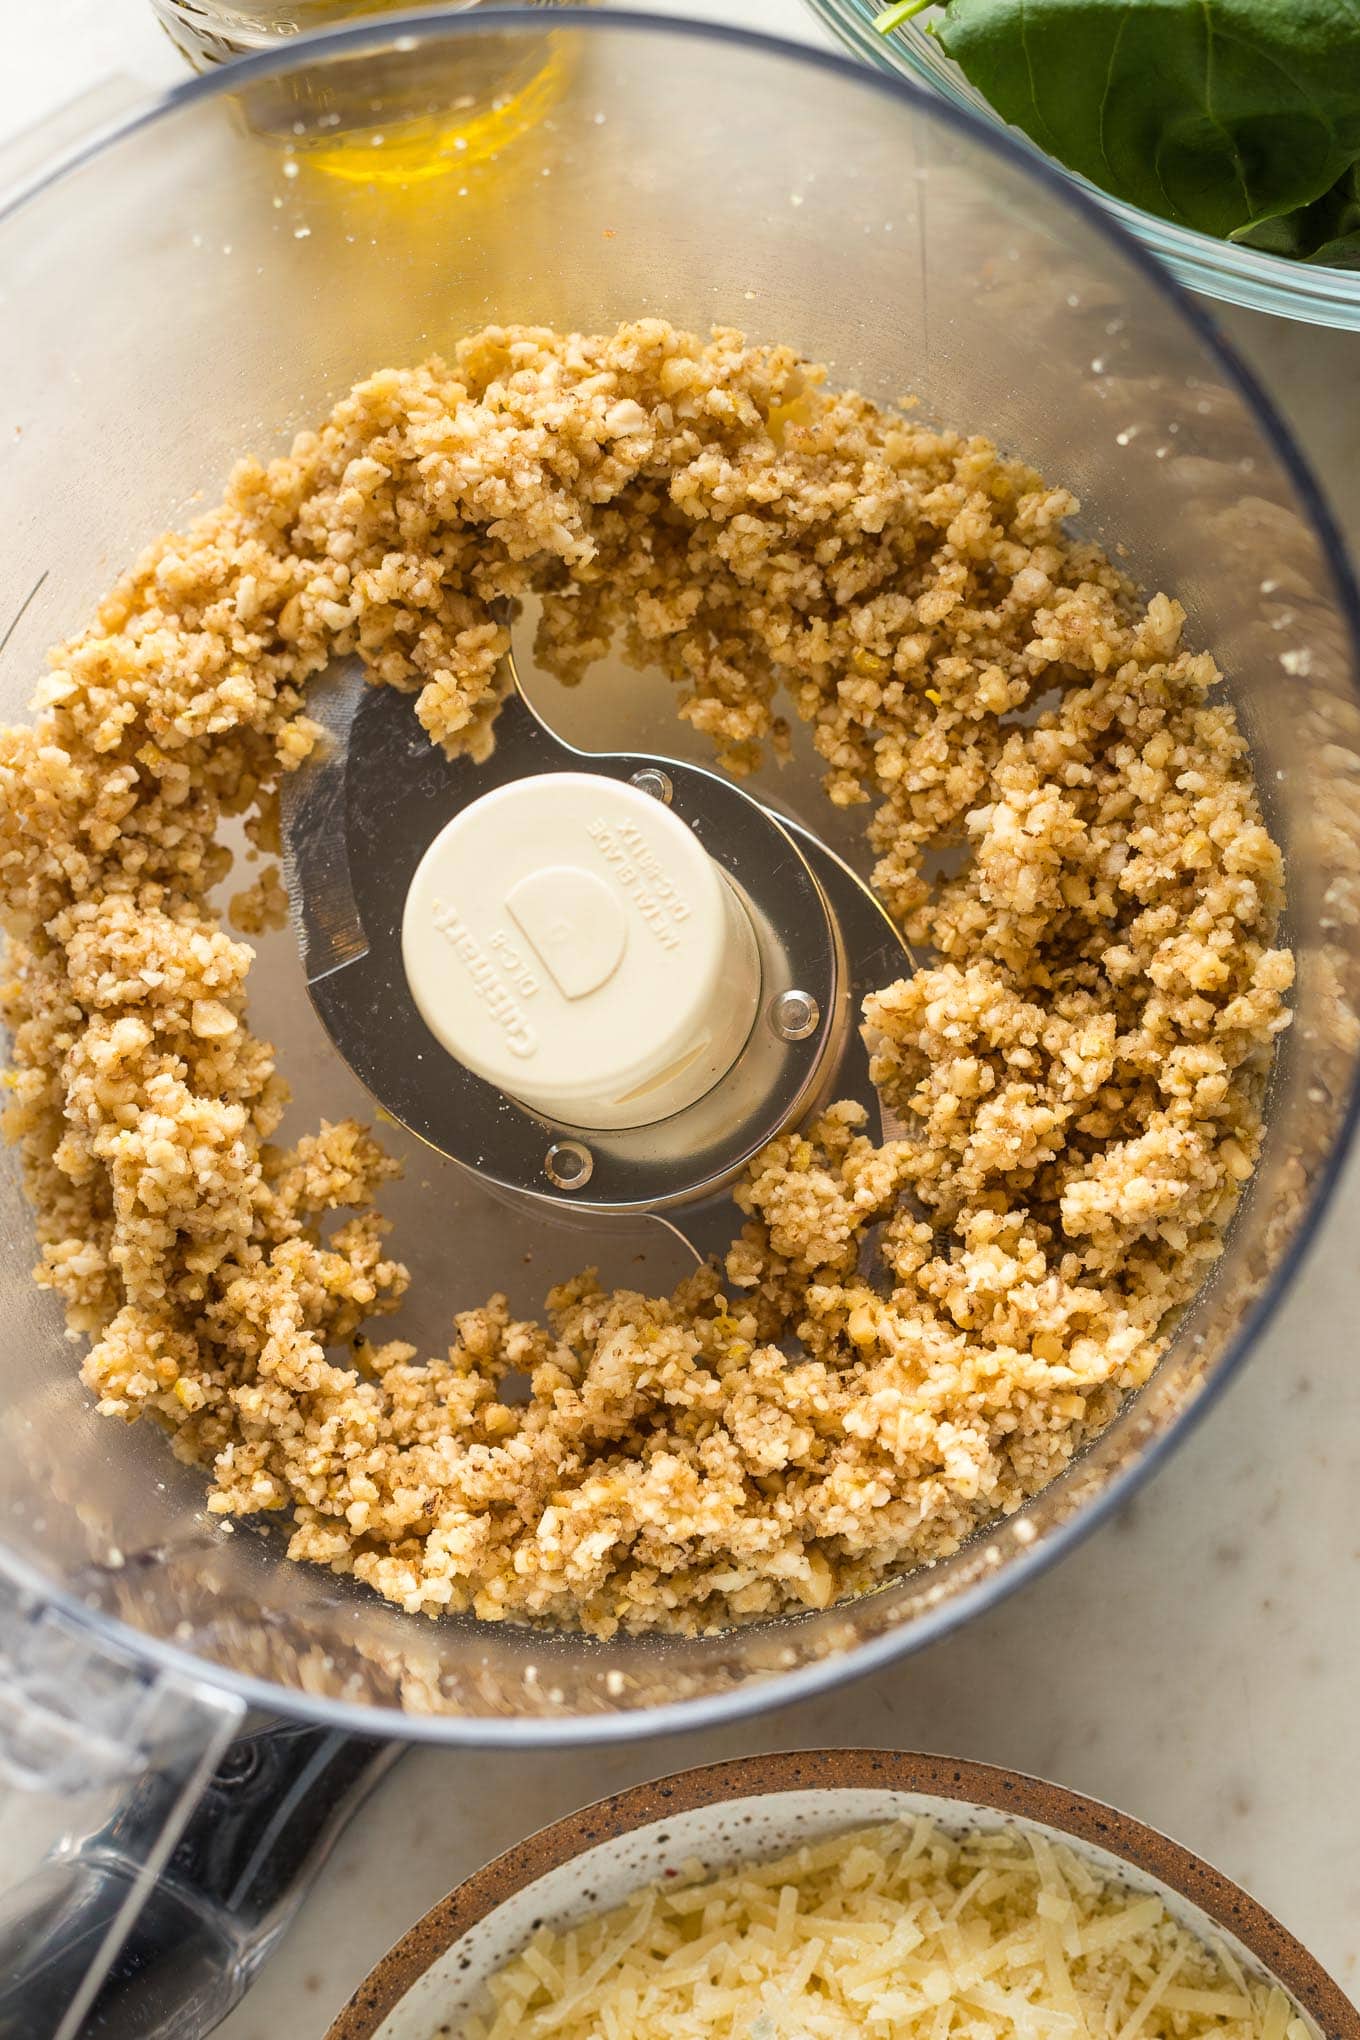 Chopped pine nuts, walnuts, and garlic in the bowl of a large food processor.